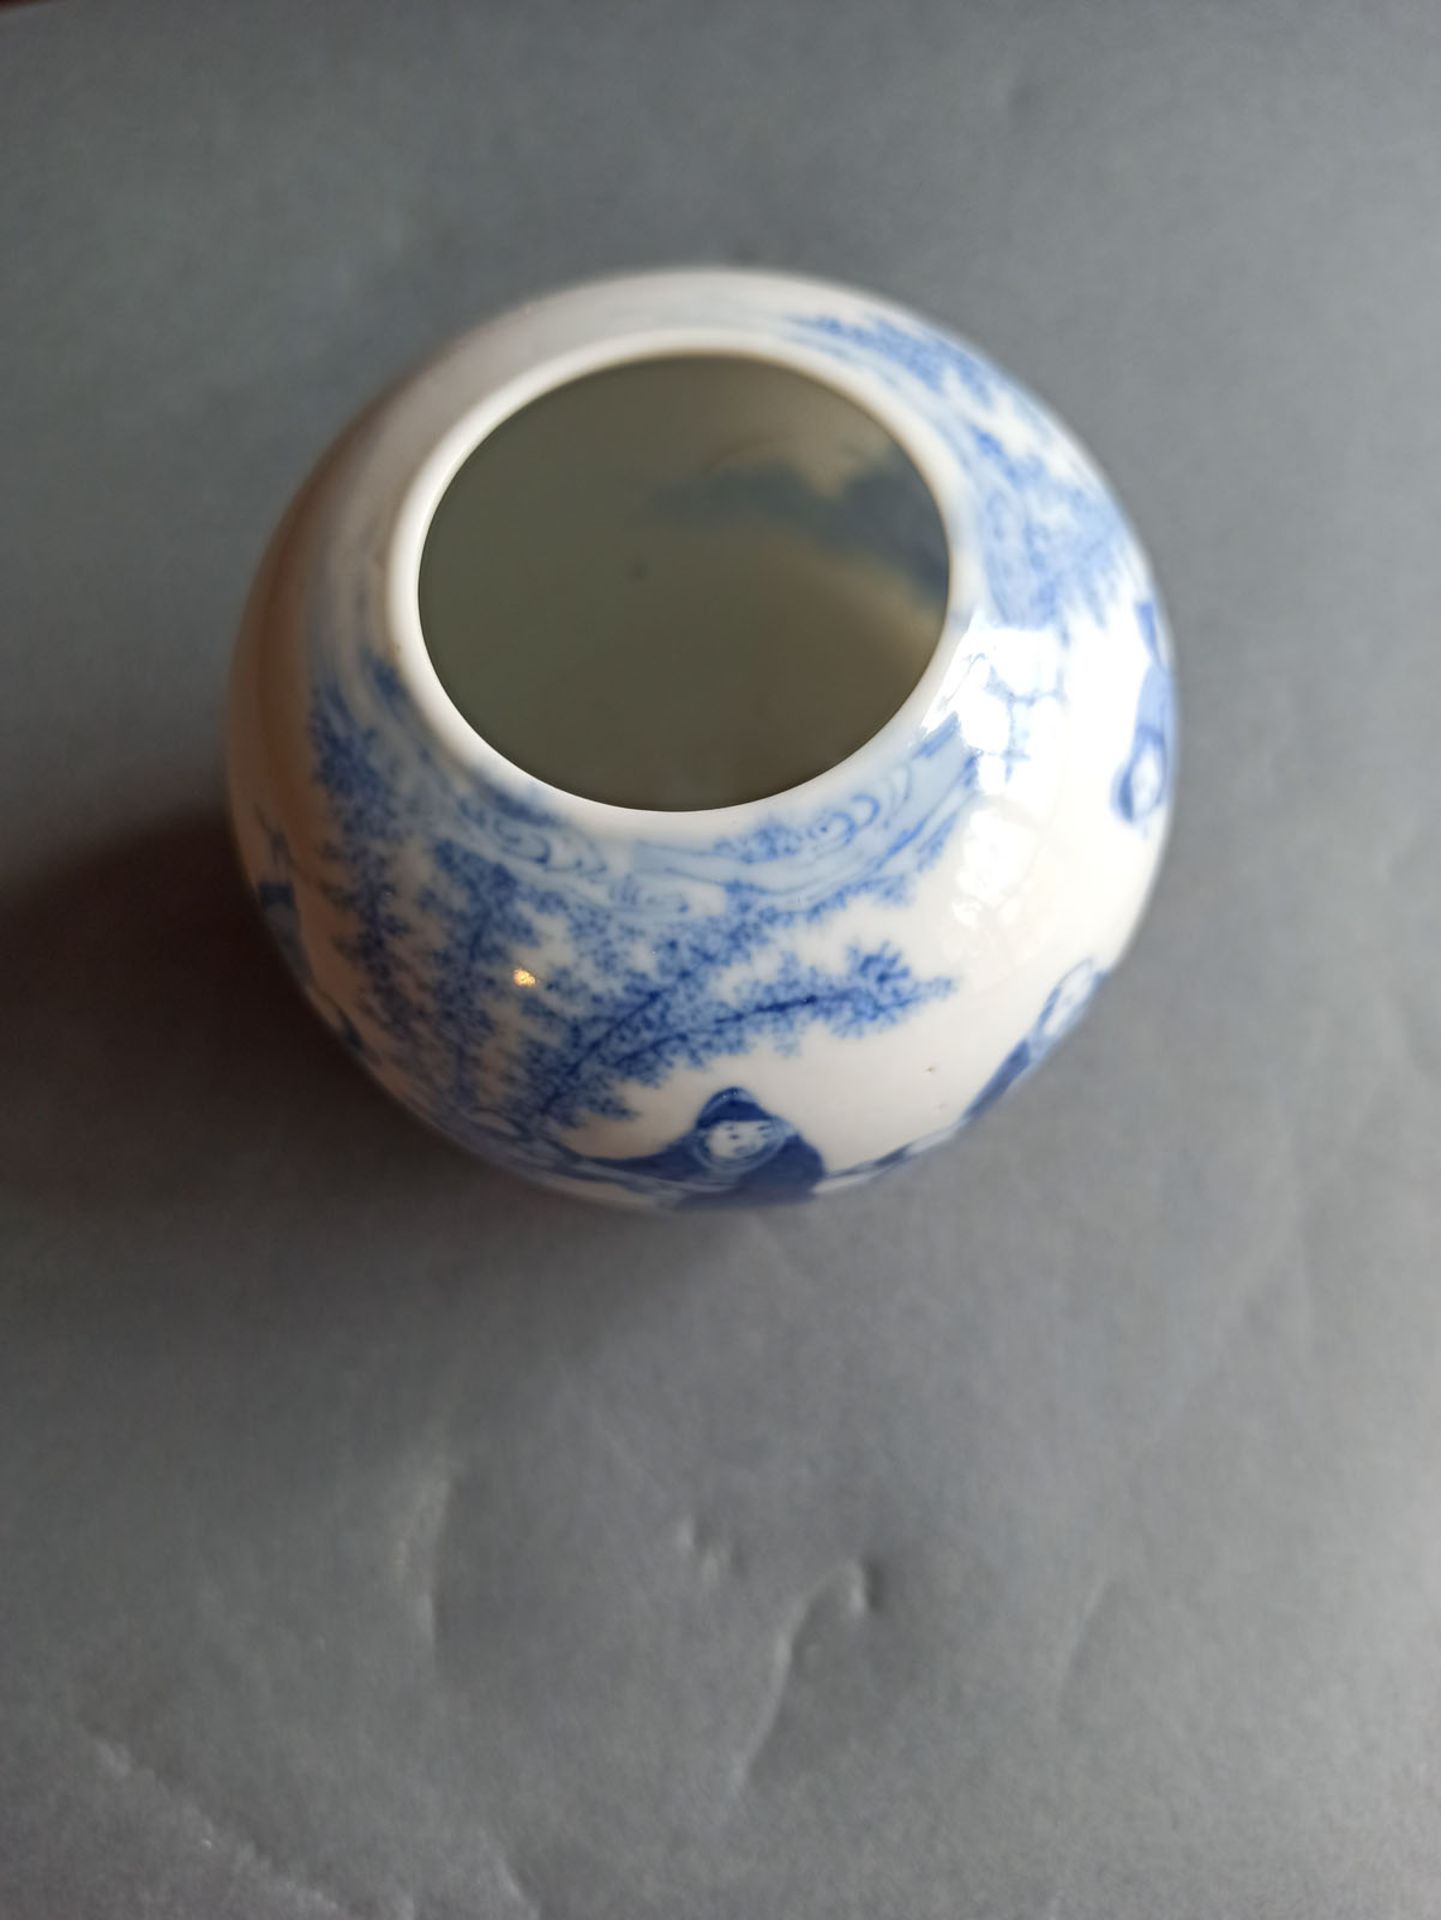 A GLOBULAR BLUE AND WHITE PORCELAIN WITH SCHIOLARS LOOKING AT A CALLIGRAPHY - Image 6 of 7